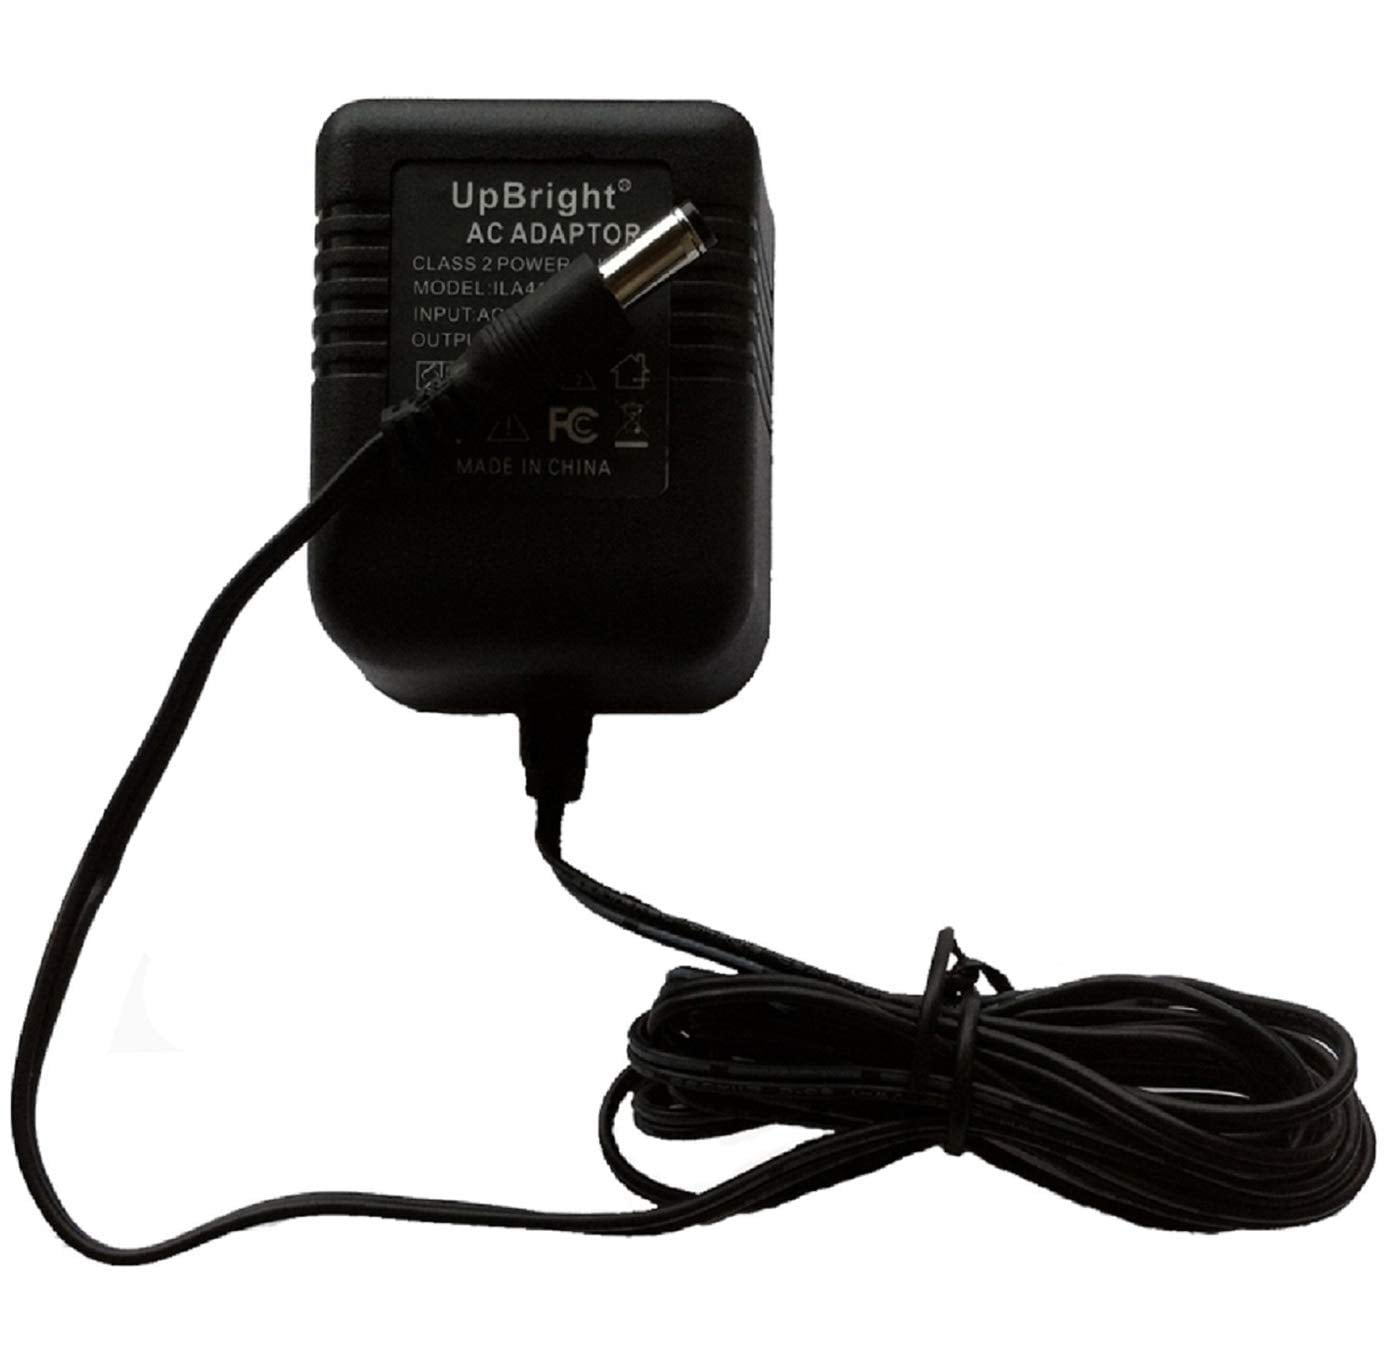 AC Adapter For Uniden AC-144U AC-144U UK Scanning Receivers Power Supply Charger 